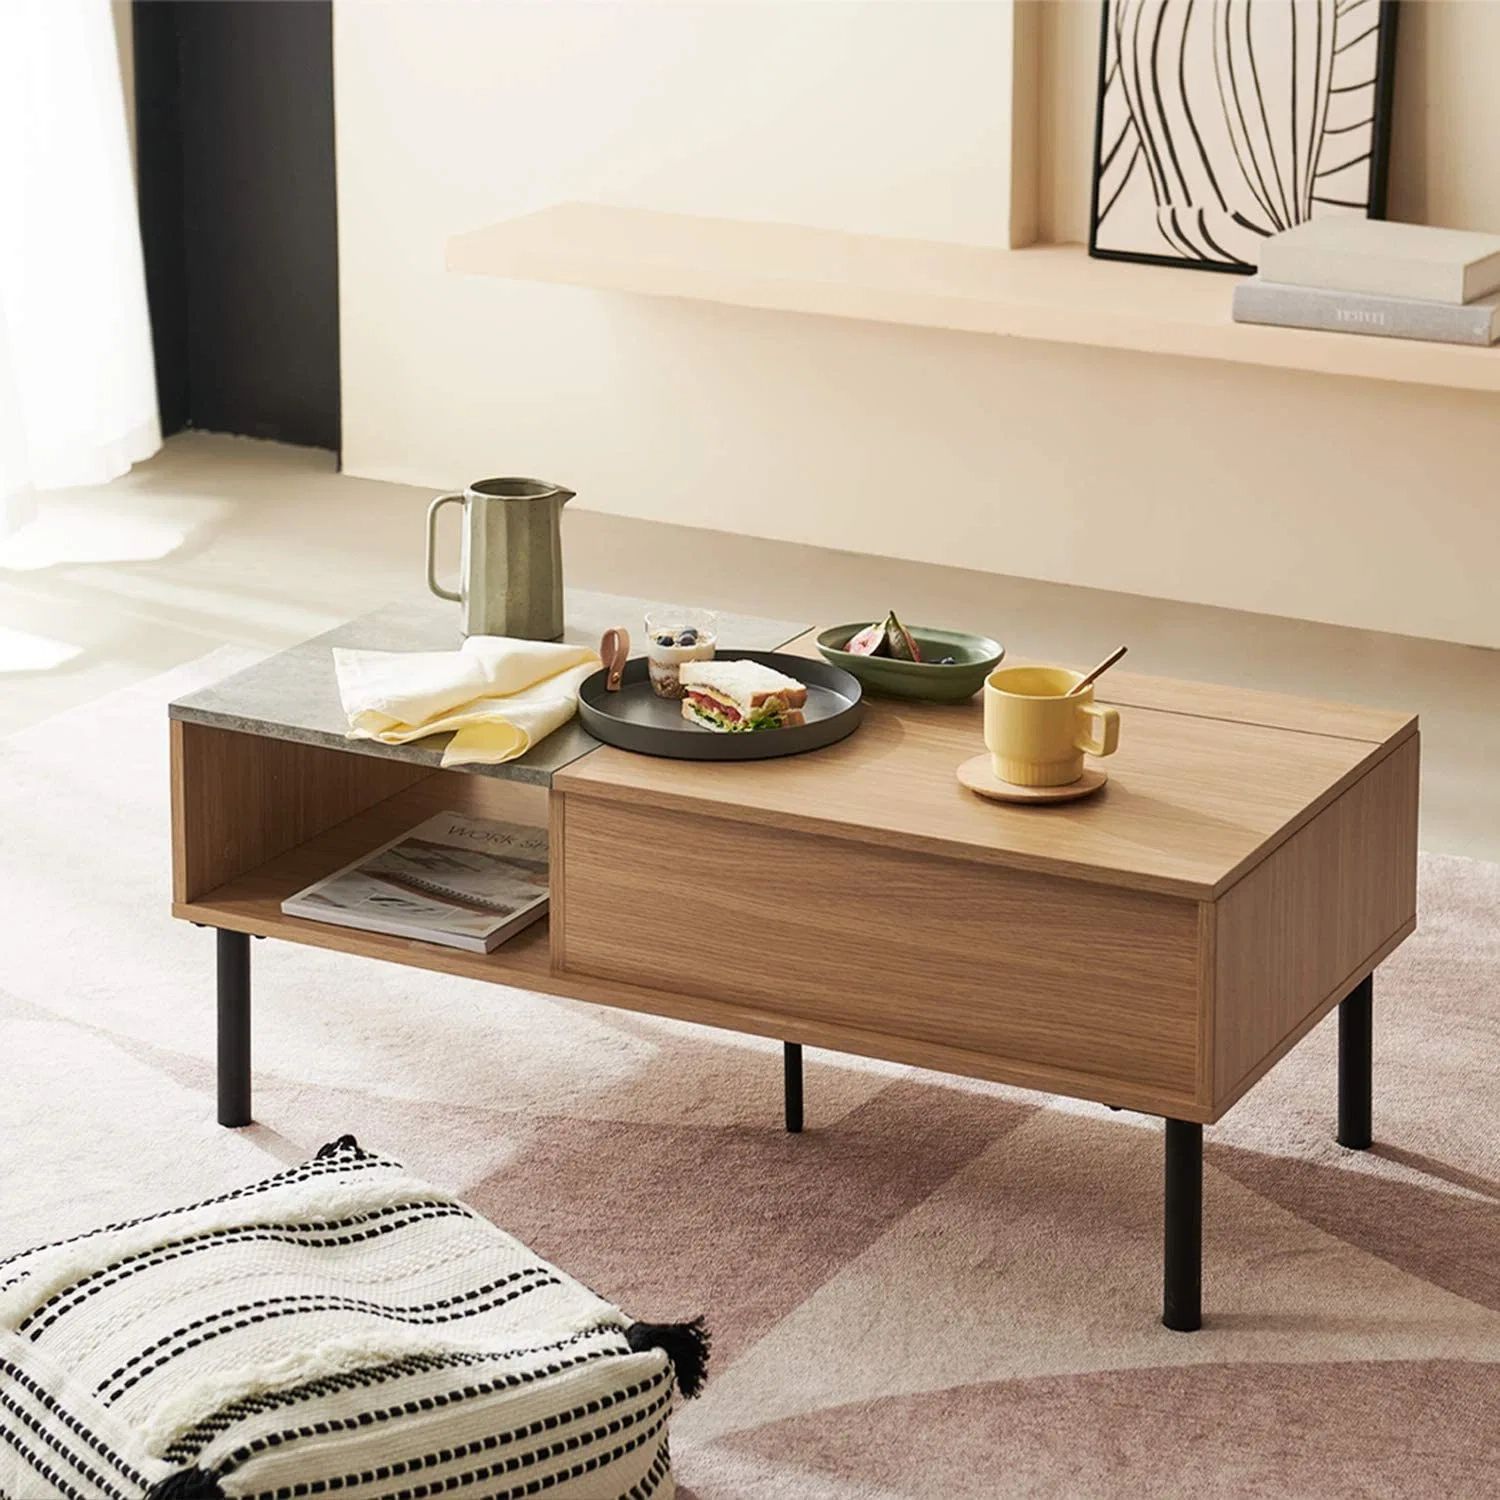 Lift Top Coffee Table With Drawers And Hidden Compartment – China Tea Table  With Chairs, Low Tea Table | Made In China With Regard To Lift Top Coffee Tables With Hidden Storage Compartments (View 15 of 15)